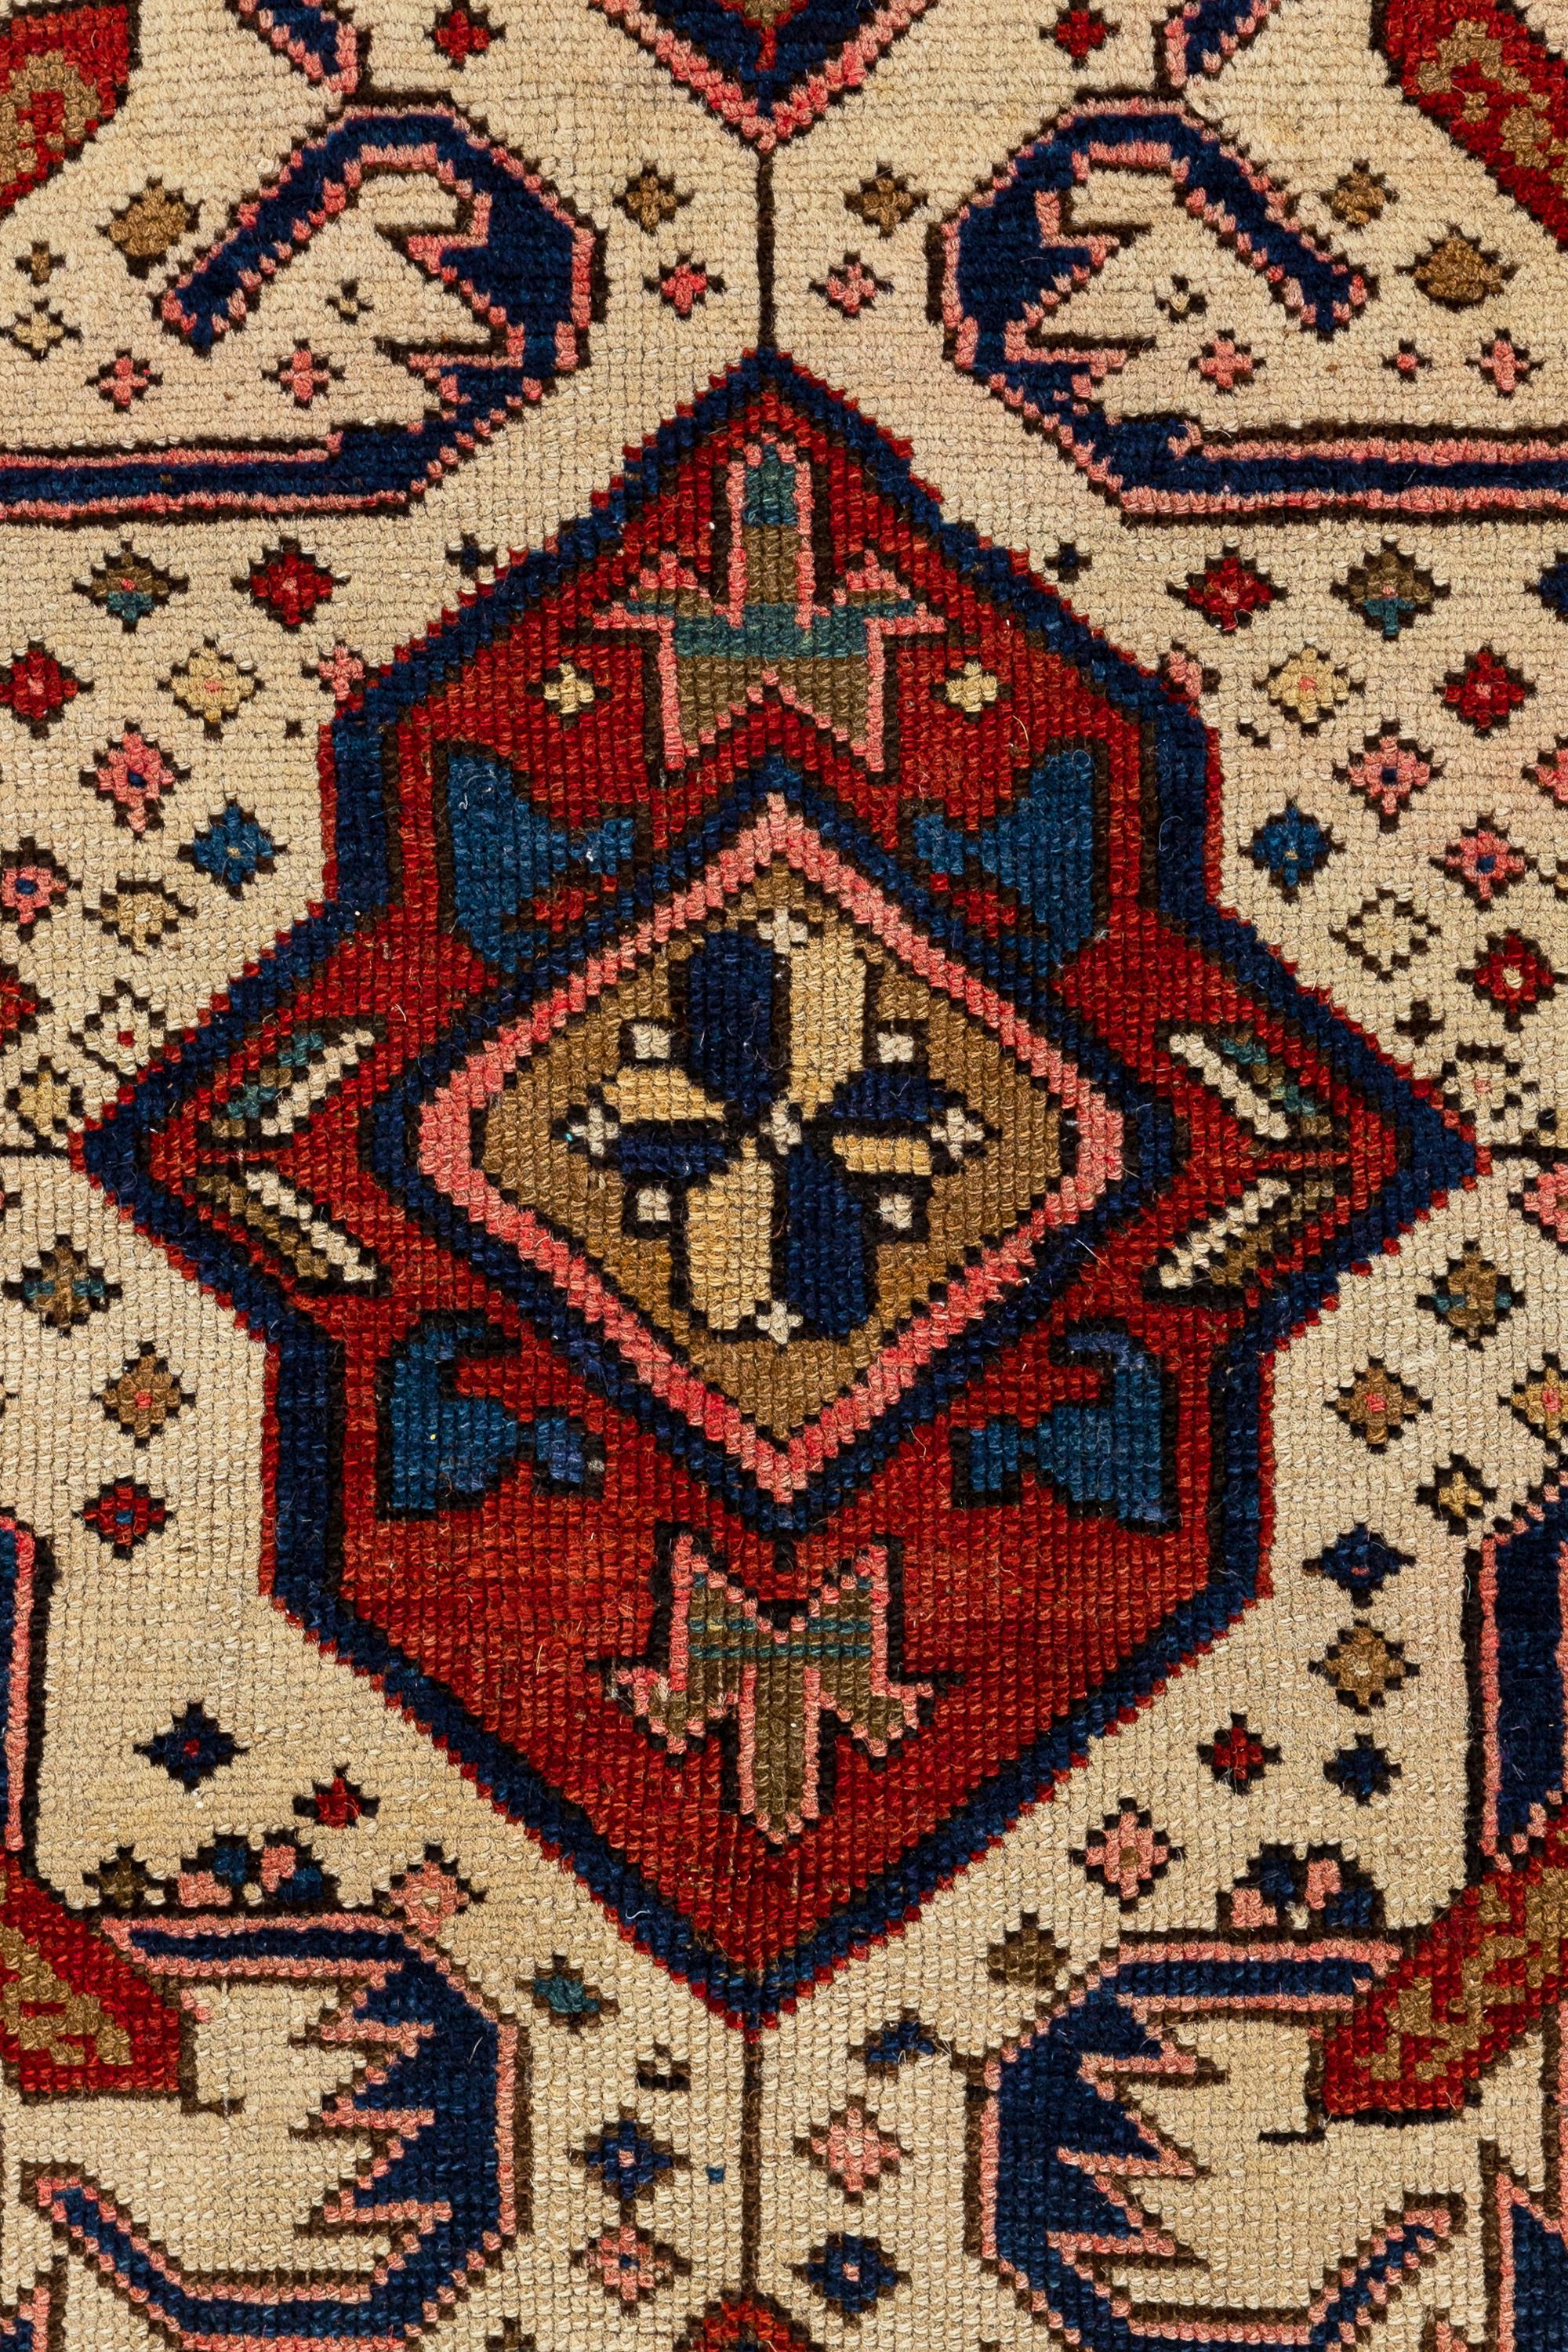 Seychour – Kuba, Northeast Caucasus

This elegant and distinct Seychour rug with an Alpan Crab design features an ivory field filled with geometric figures, including diamonds, flowers, and colourful animals arranged randomly and spontaneously. In